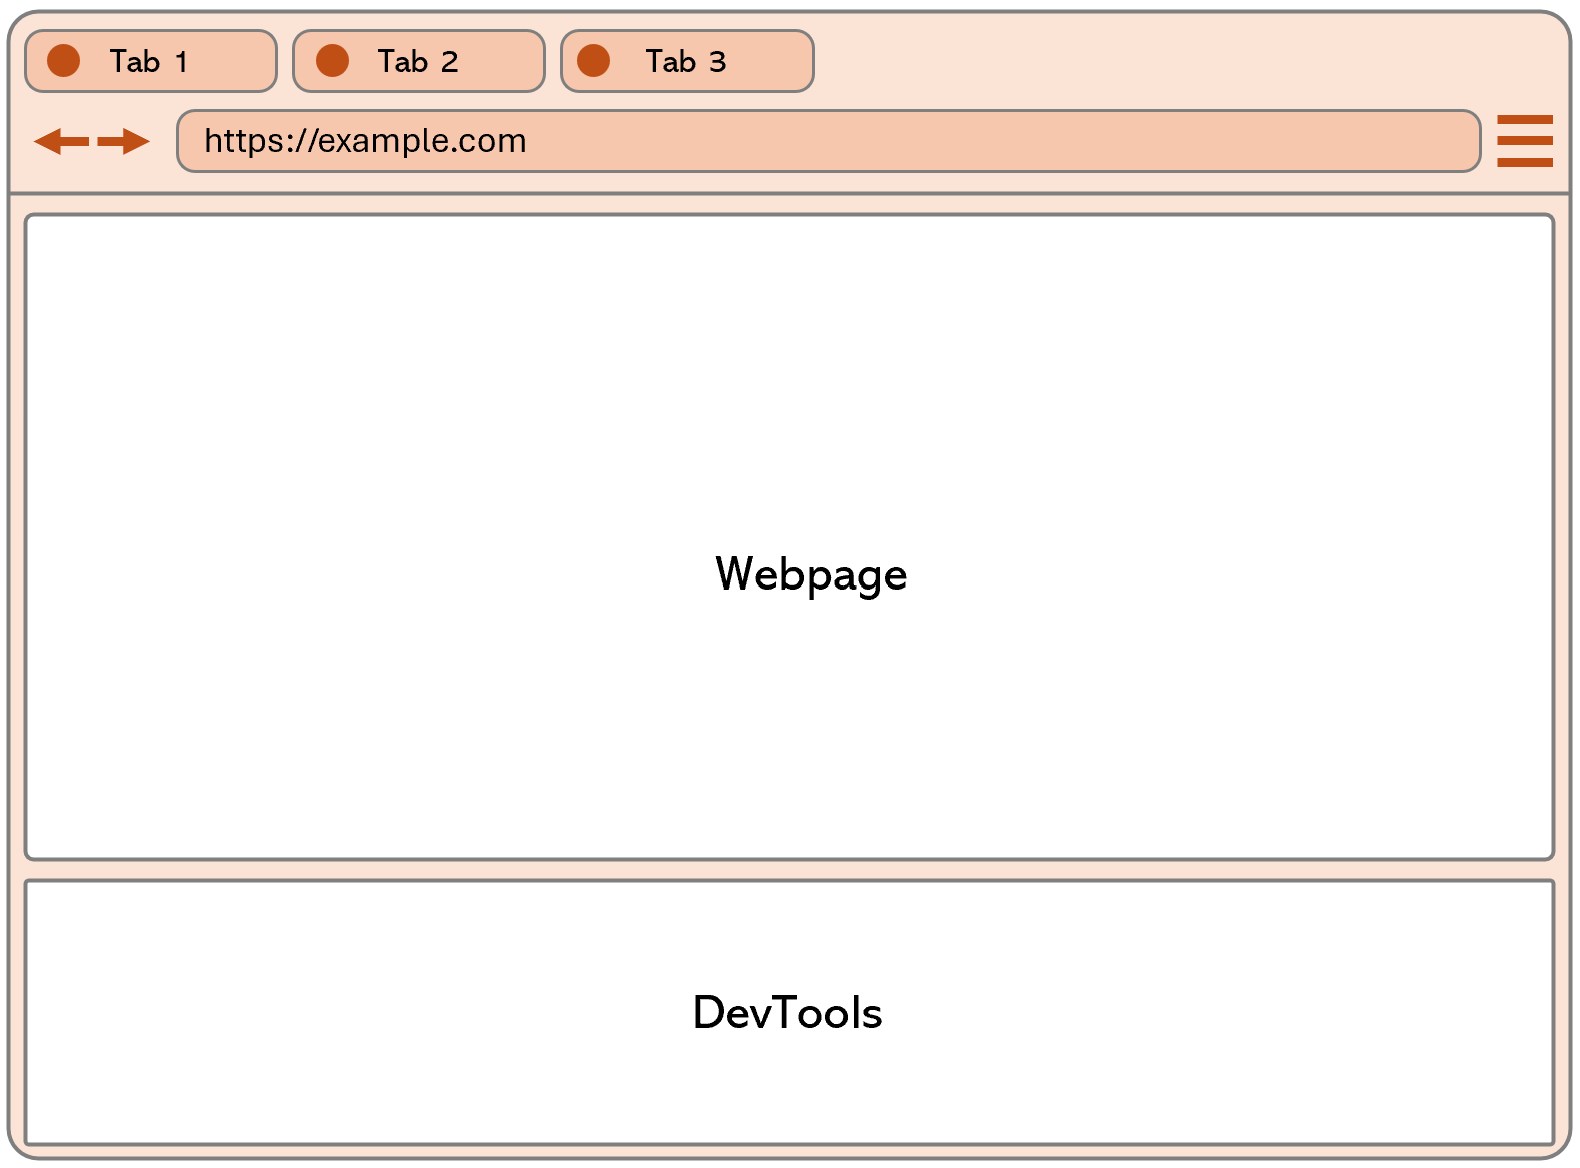 A browser window, with a rendered webpage on the top, and DevTools at the bottom